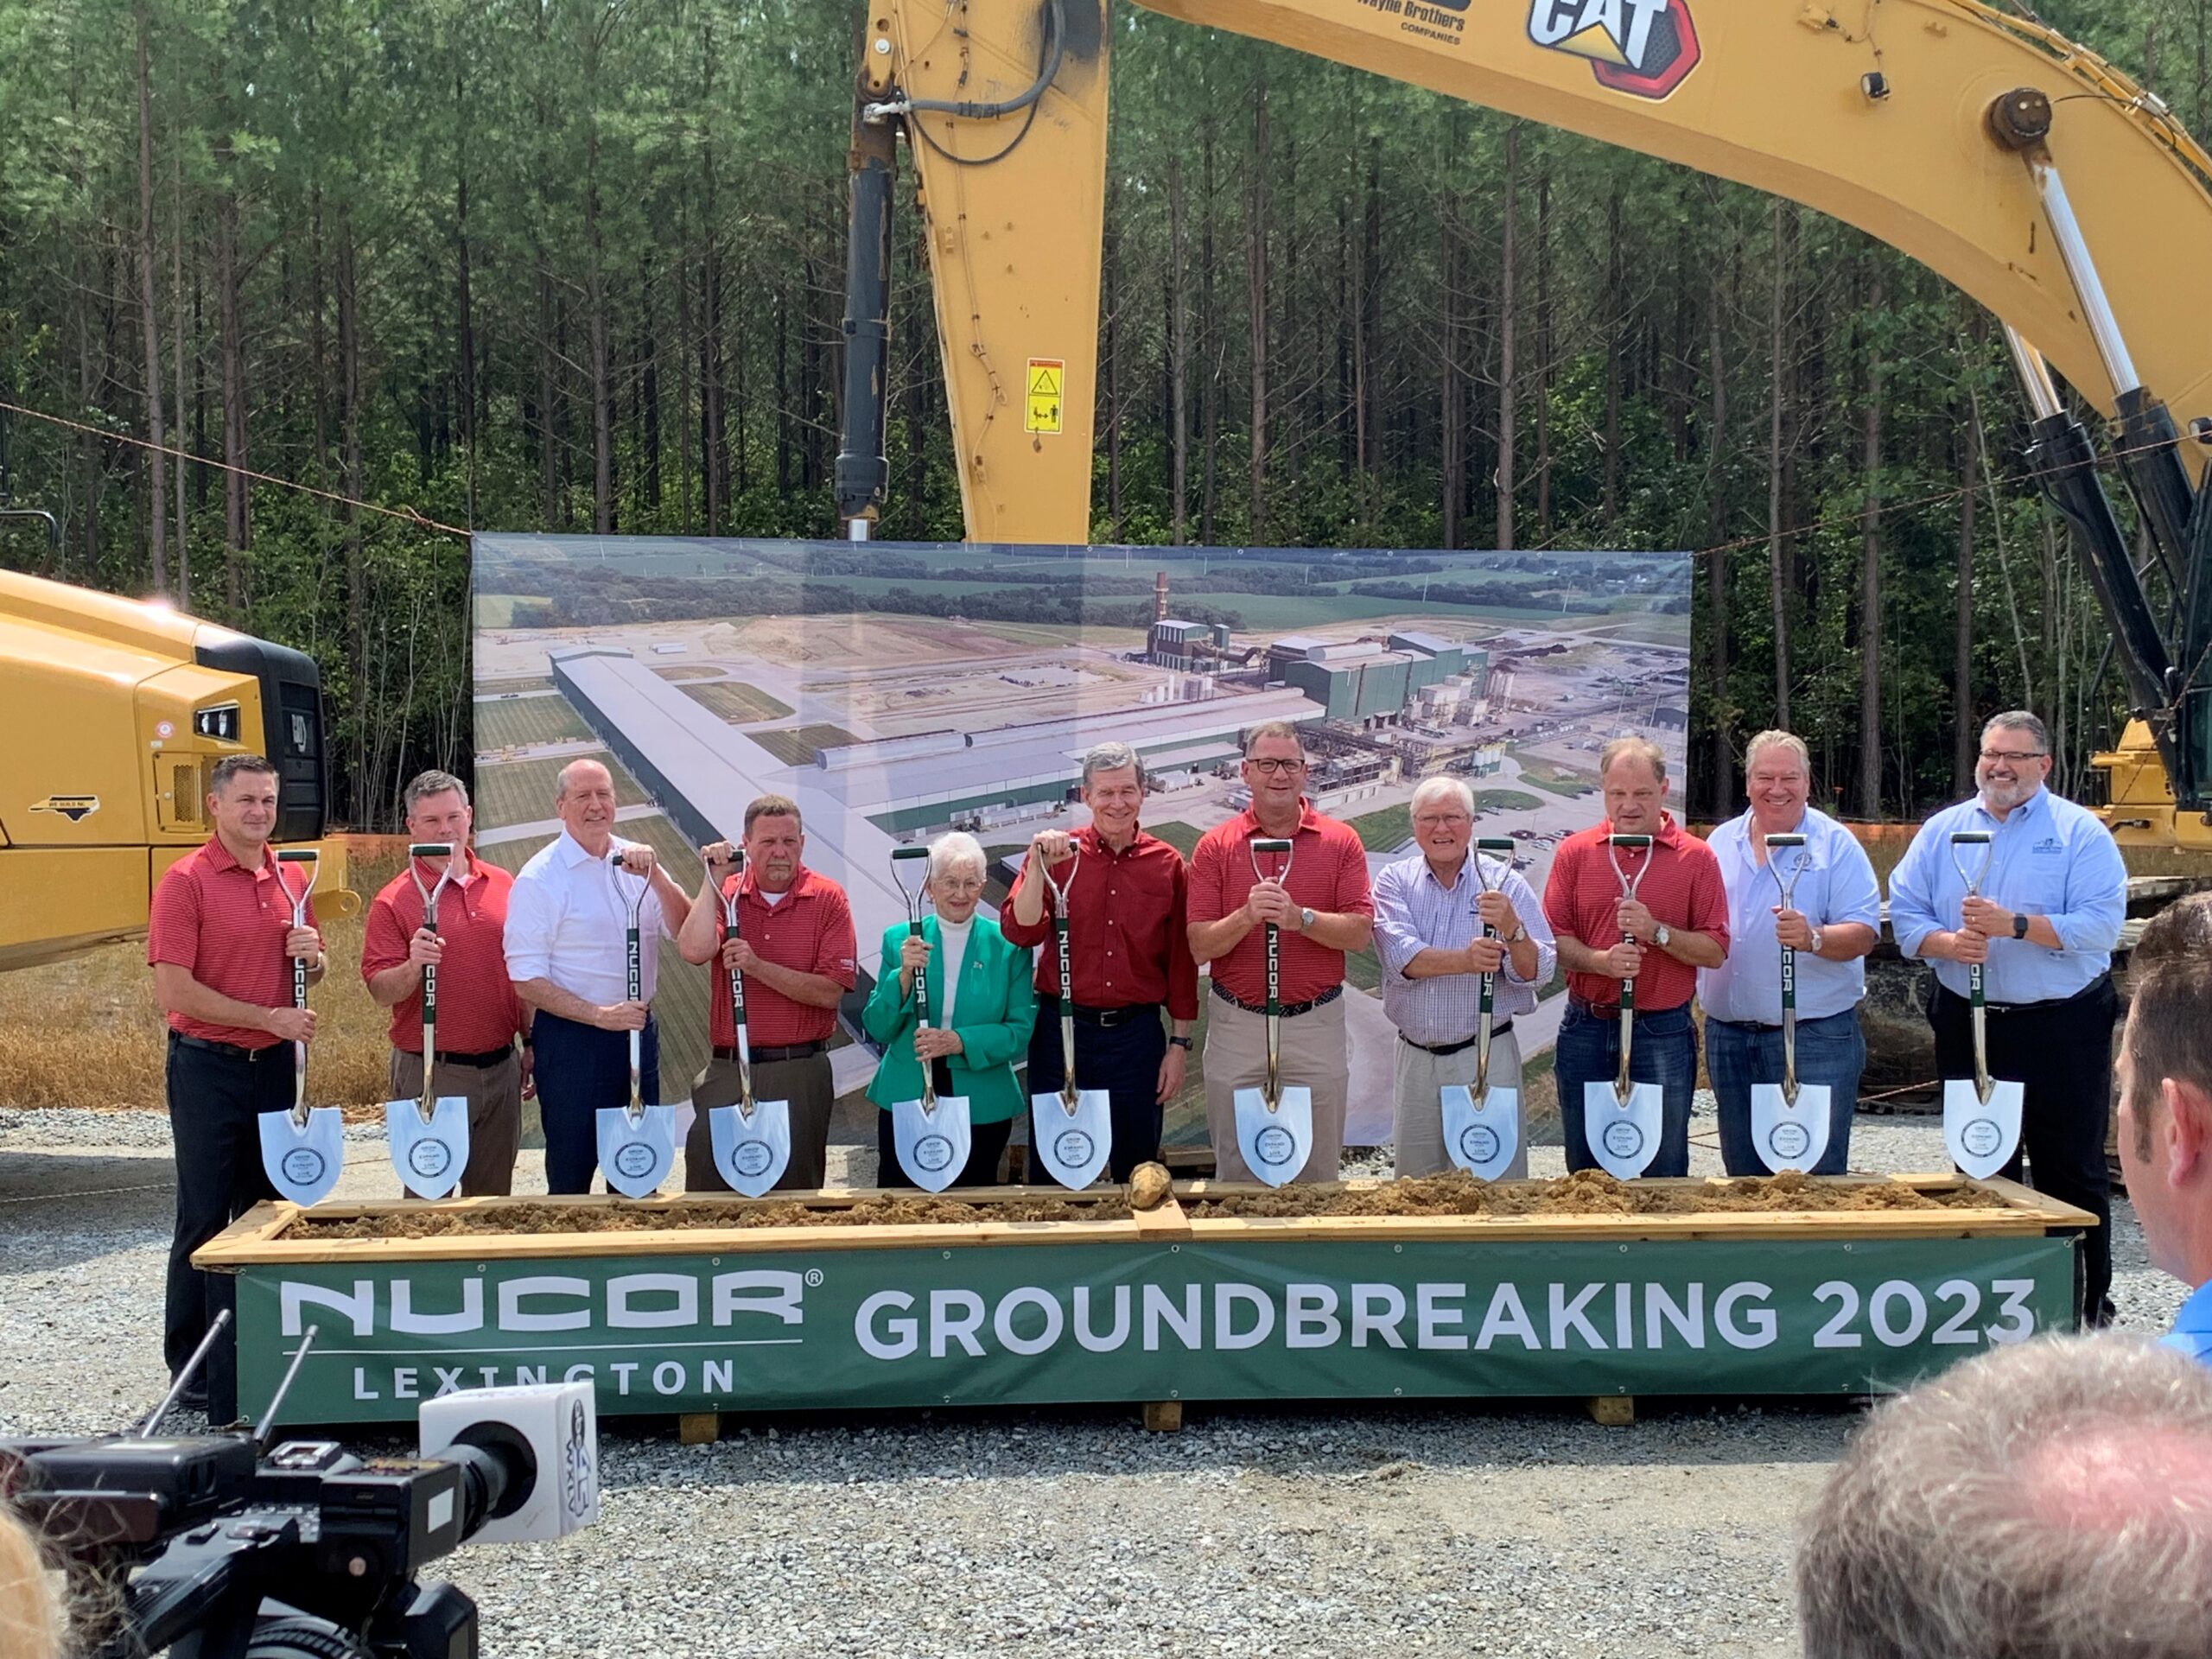 NUCOR of Lexington's ground breaking ceremony. Lexington leaders and NUCOR leaders pose with shovels for the ceremony.